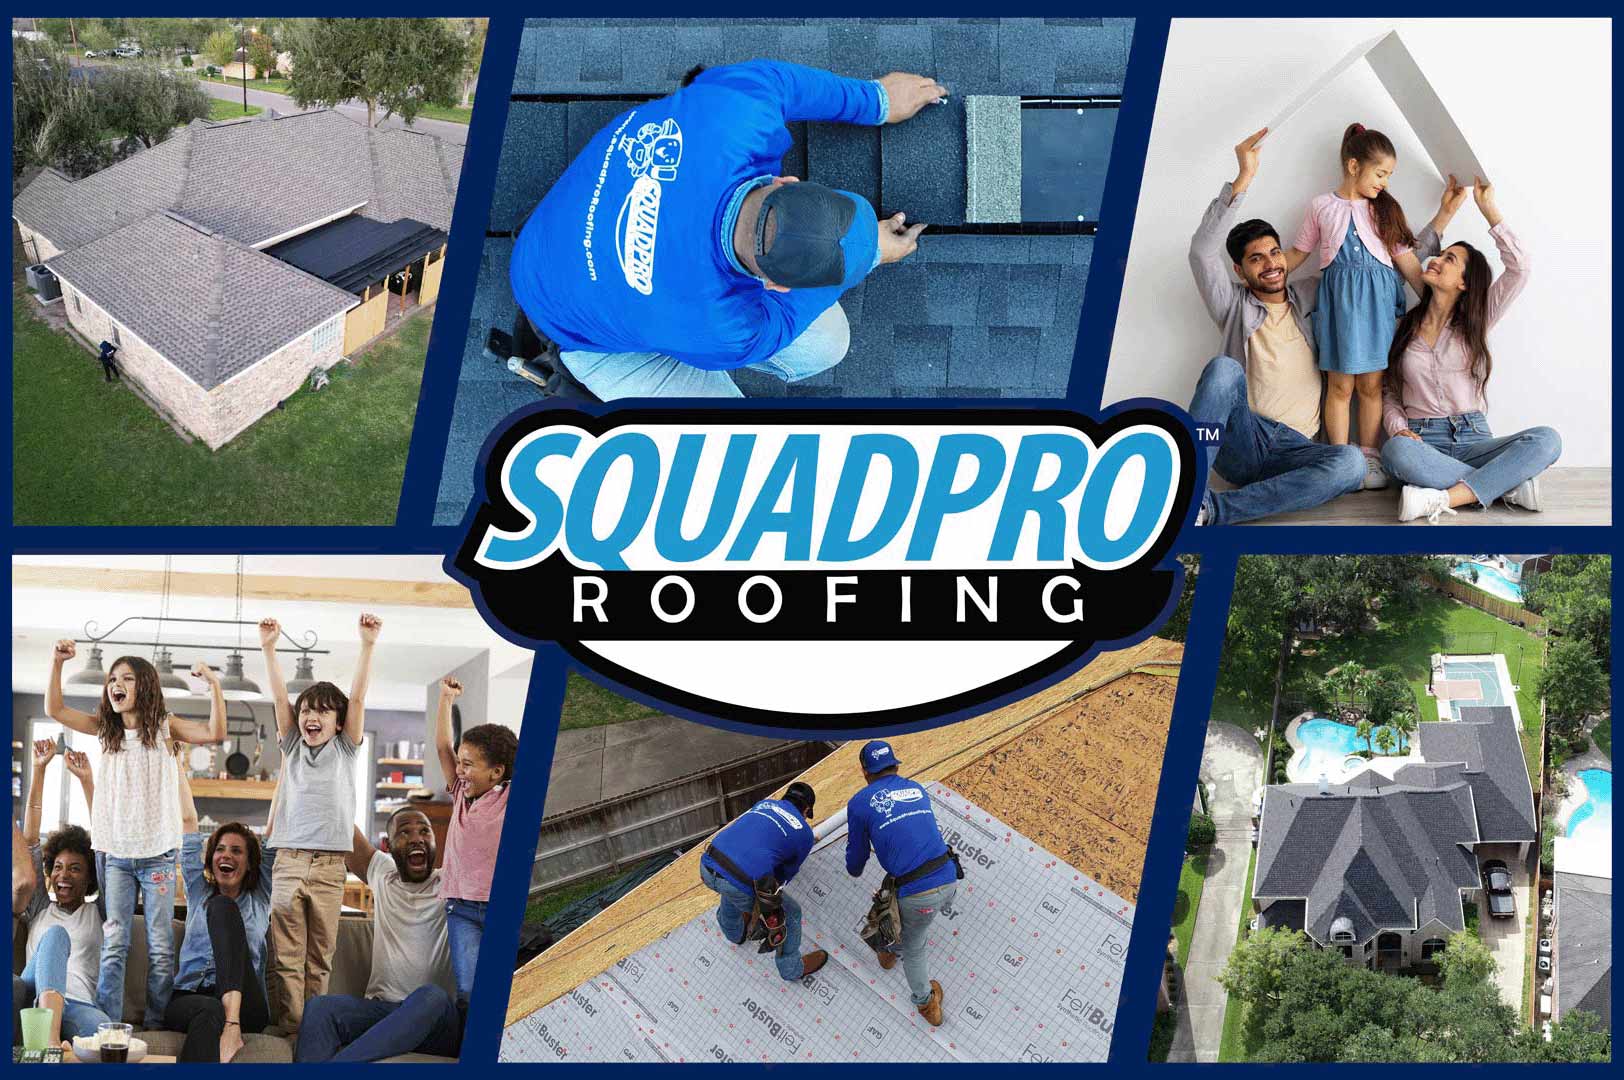 SquadPro-Roofing-Roof-Replacement-in-Houston-McAllen-Austin-San-Antonio-Corpus-and-Dallas-A005